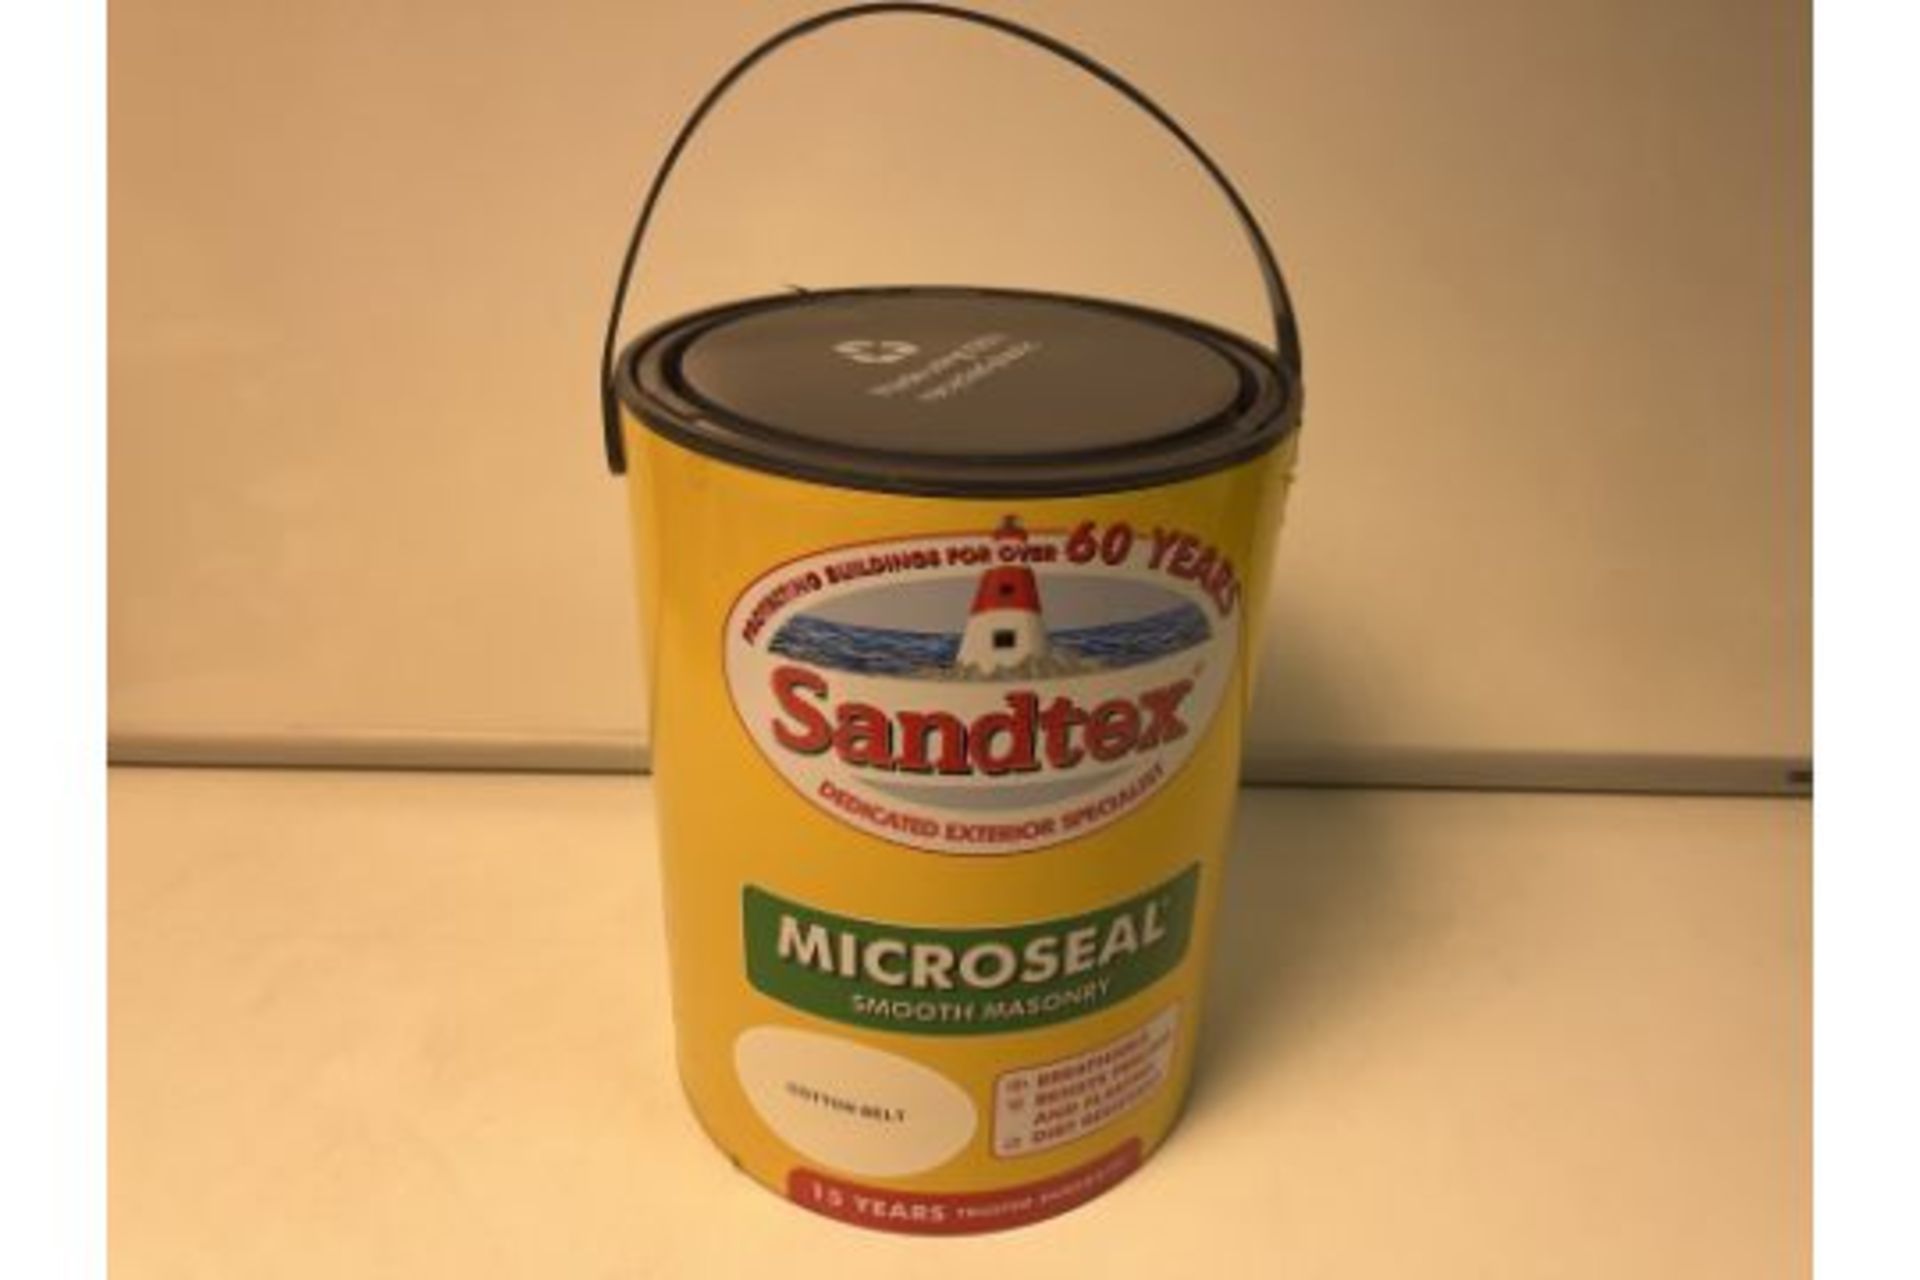 4 X NEW SEALED 5L TUBS OF SANDTEX MICROSEAL SMOOTH MASONRY PAINT (COTTON BELT). (ROW9INSL)